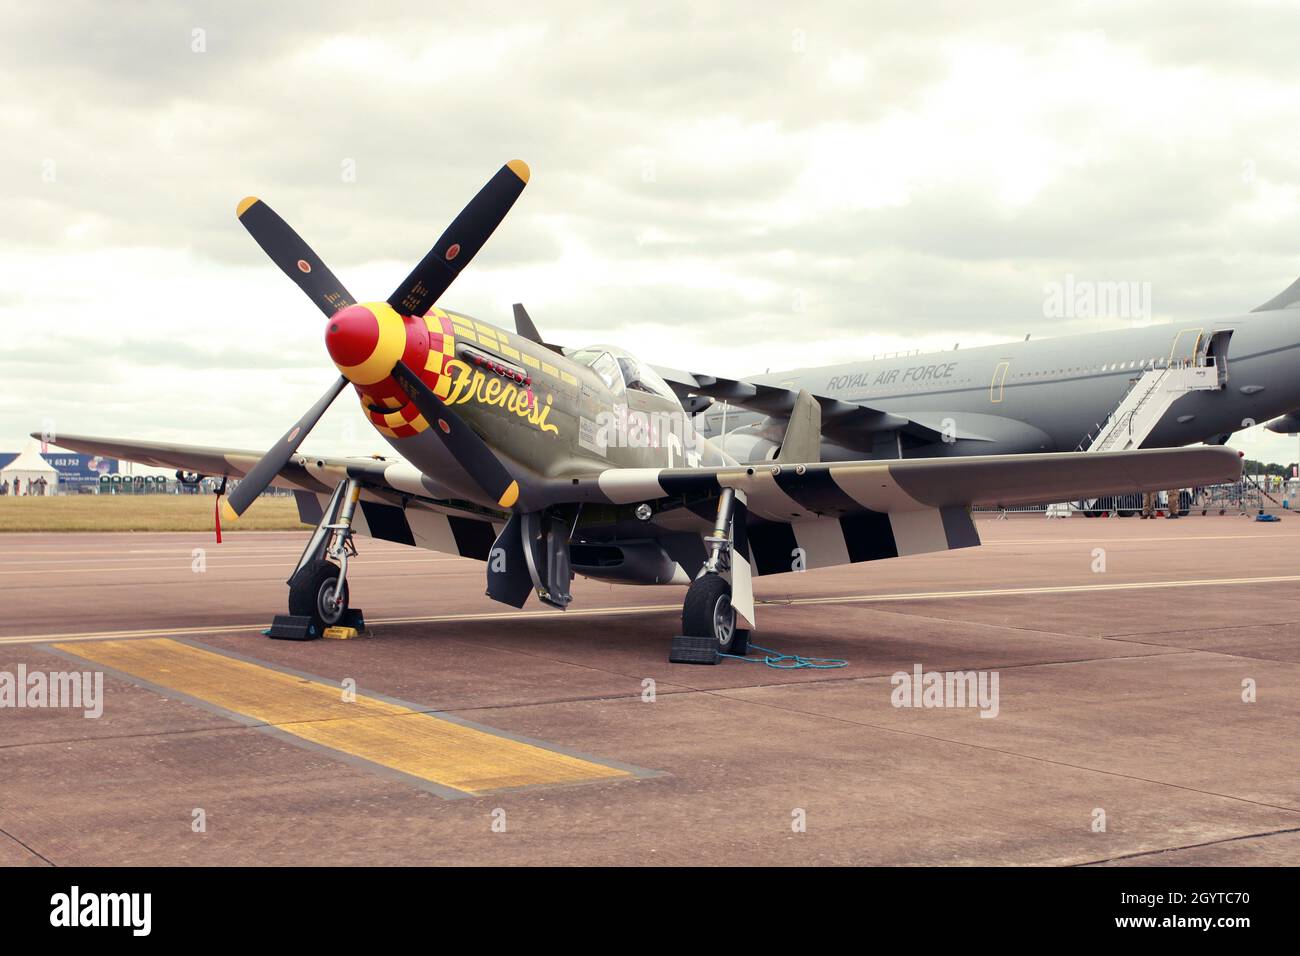 P-51 Mustang Fighter aircraft Stock Photo